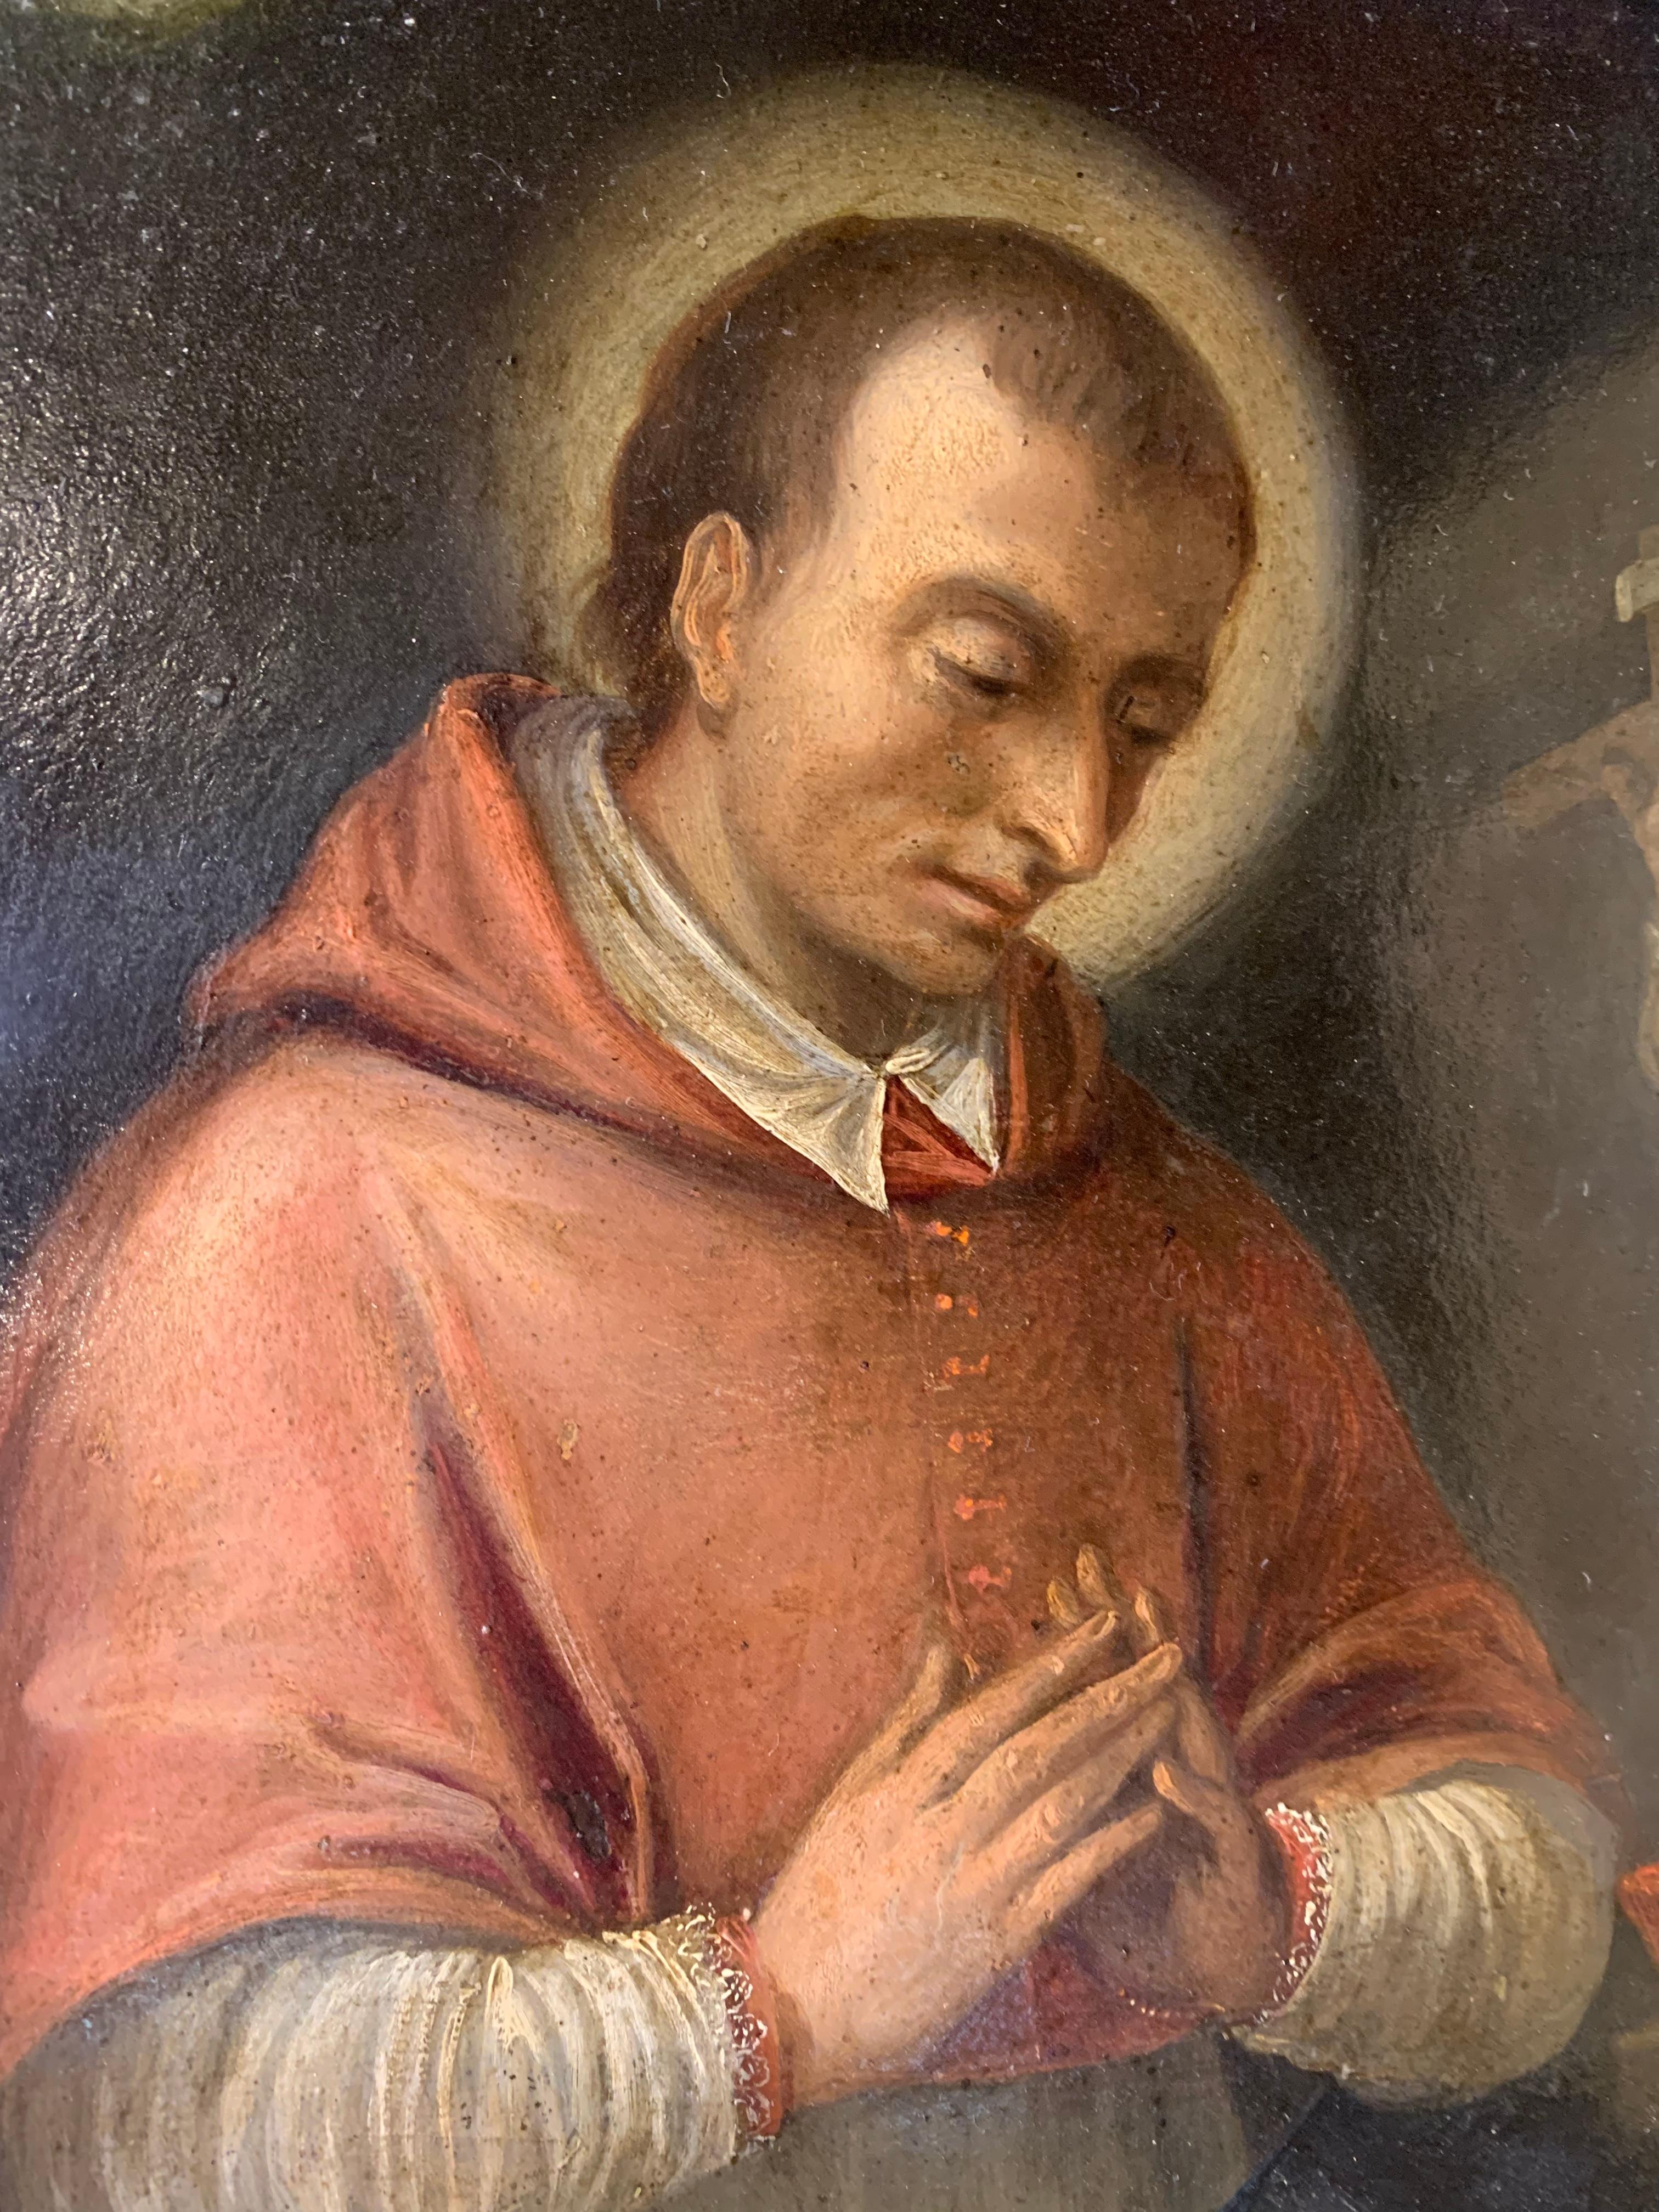 San Carlo Borromeo.
Early 17th century.
Technique: oil on copper.
Good state of conservation.
It represents San Carlo praying in front of a book, a human skull and a crucifix.
Italian school.
The saint is represented without tonsure but with a halo